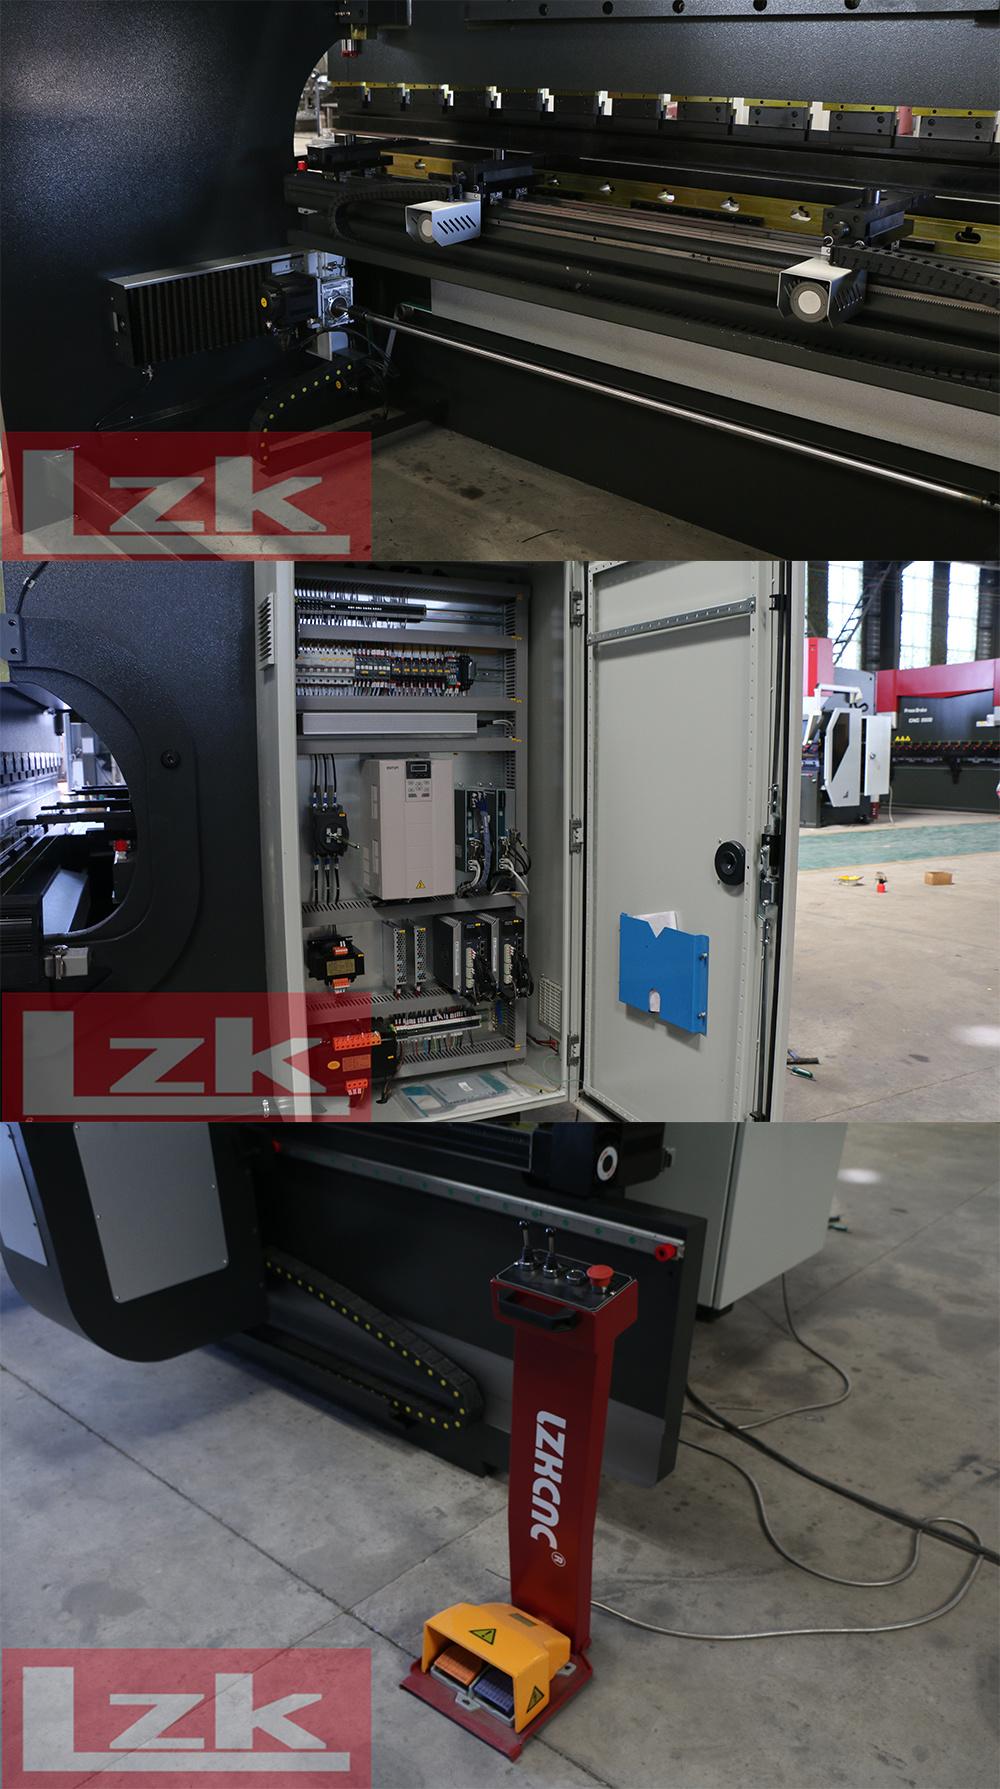 Hpb-110/3100 CNC Press Brake with Follow-up Support System